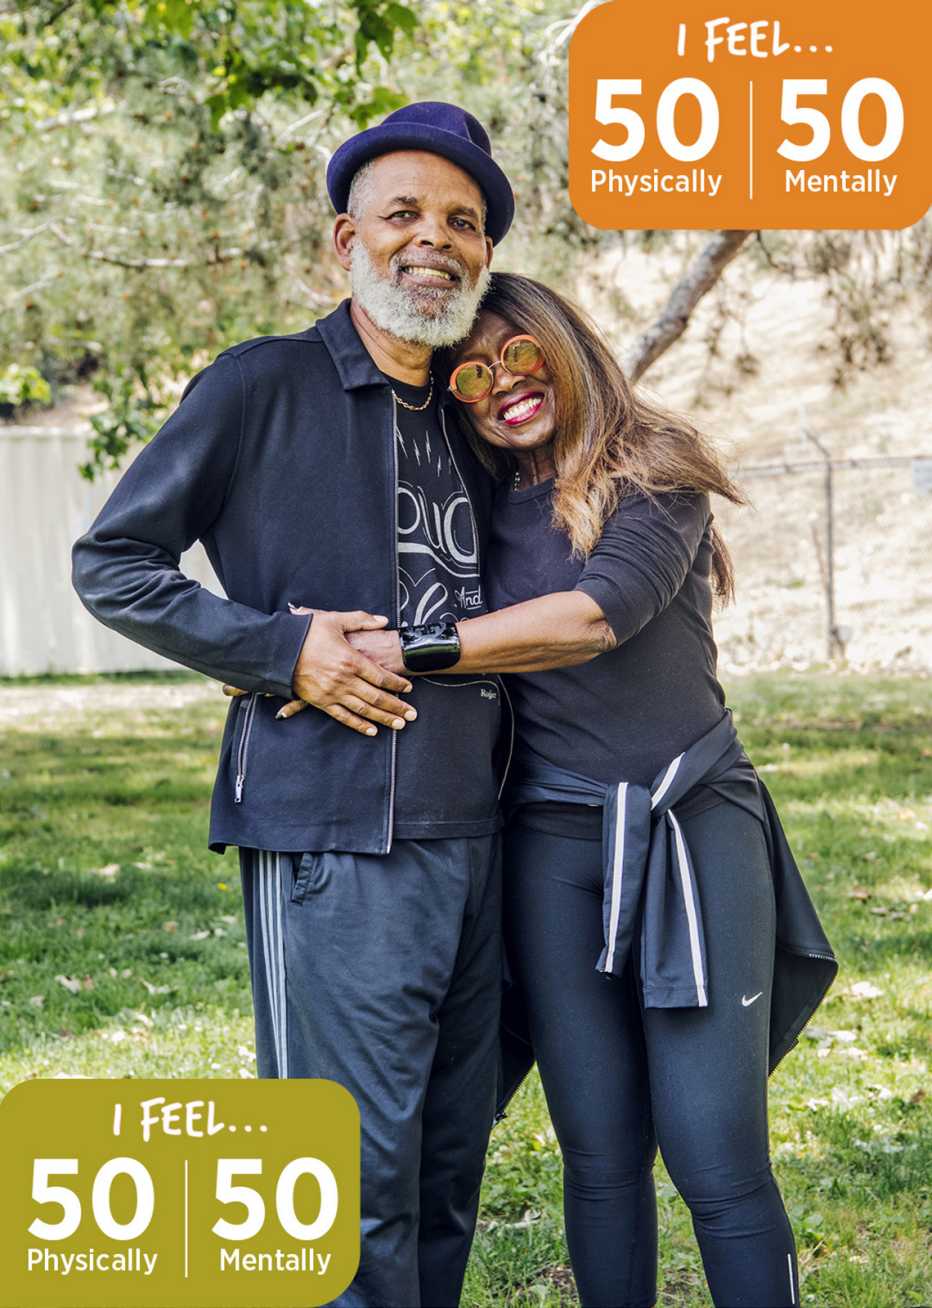 seventy one year old eric mosley and eighty one clara mosley both of them say they only feel age fifty both physically and mentally